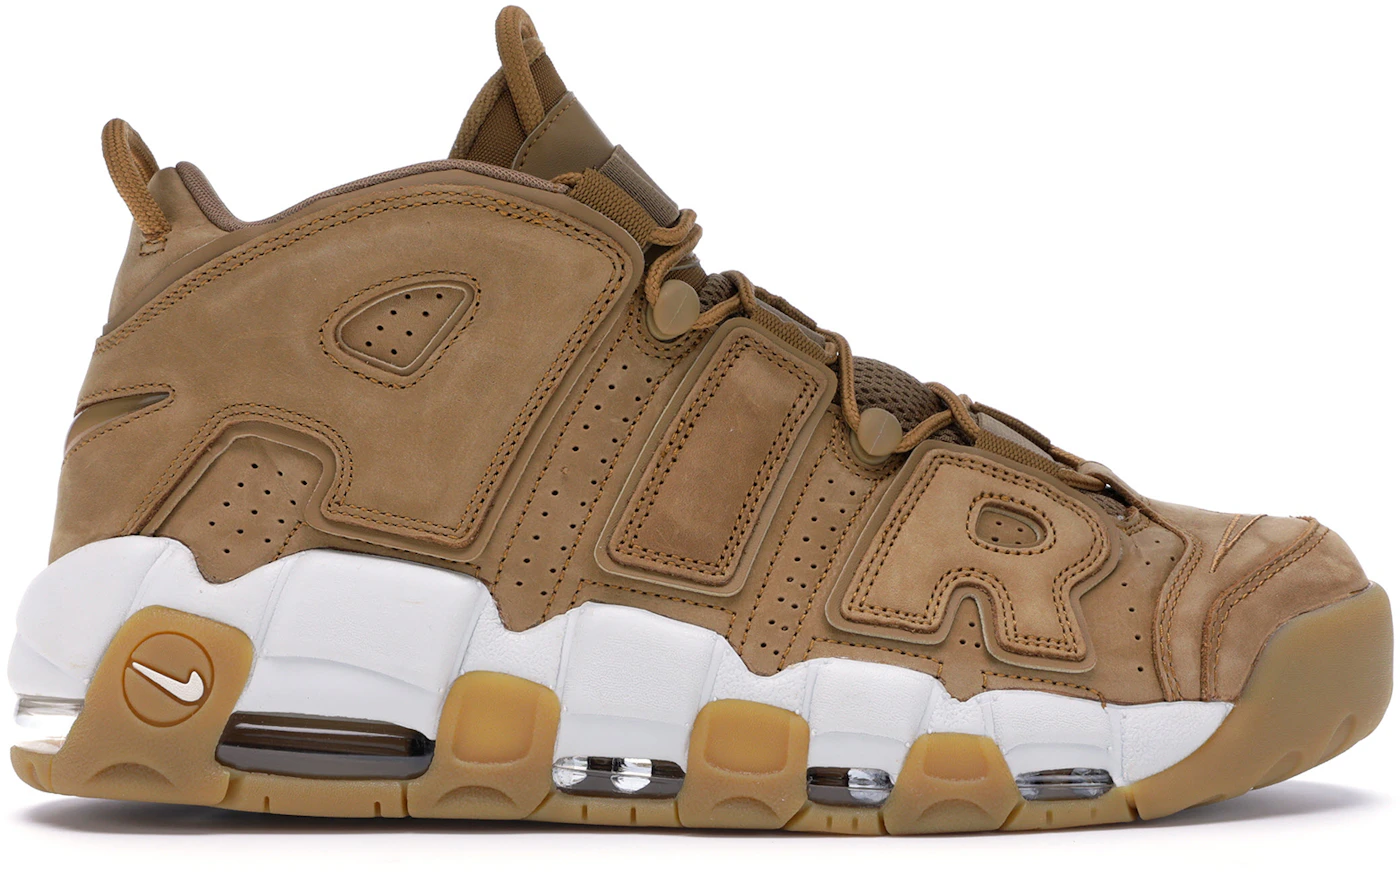 NIKE Air More Uptempo '96 rubber-trimmed leather sneakers